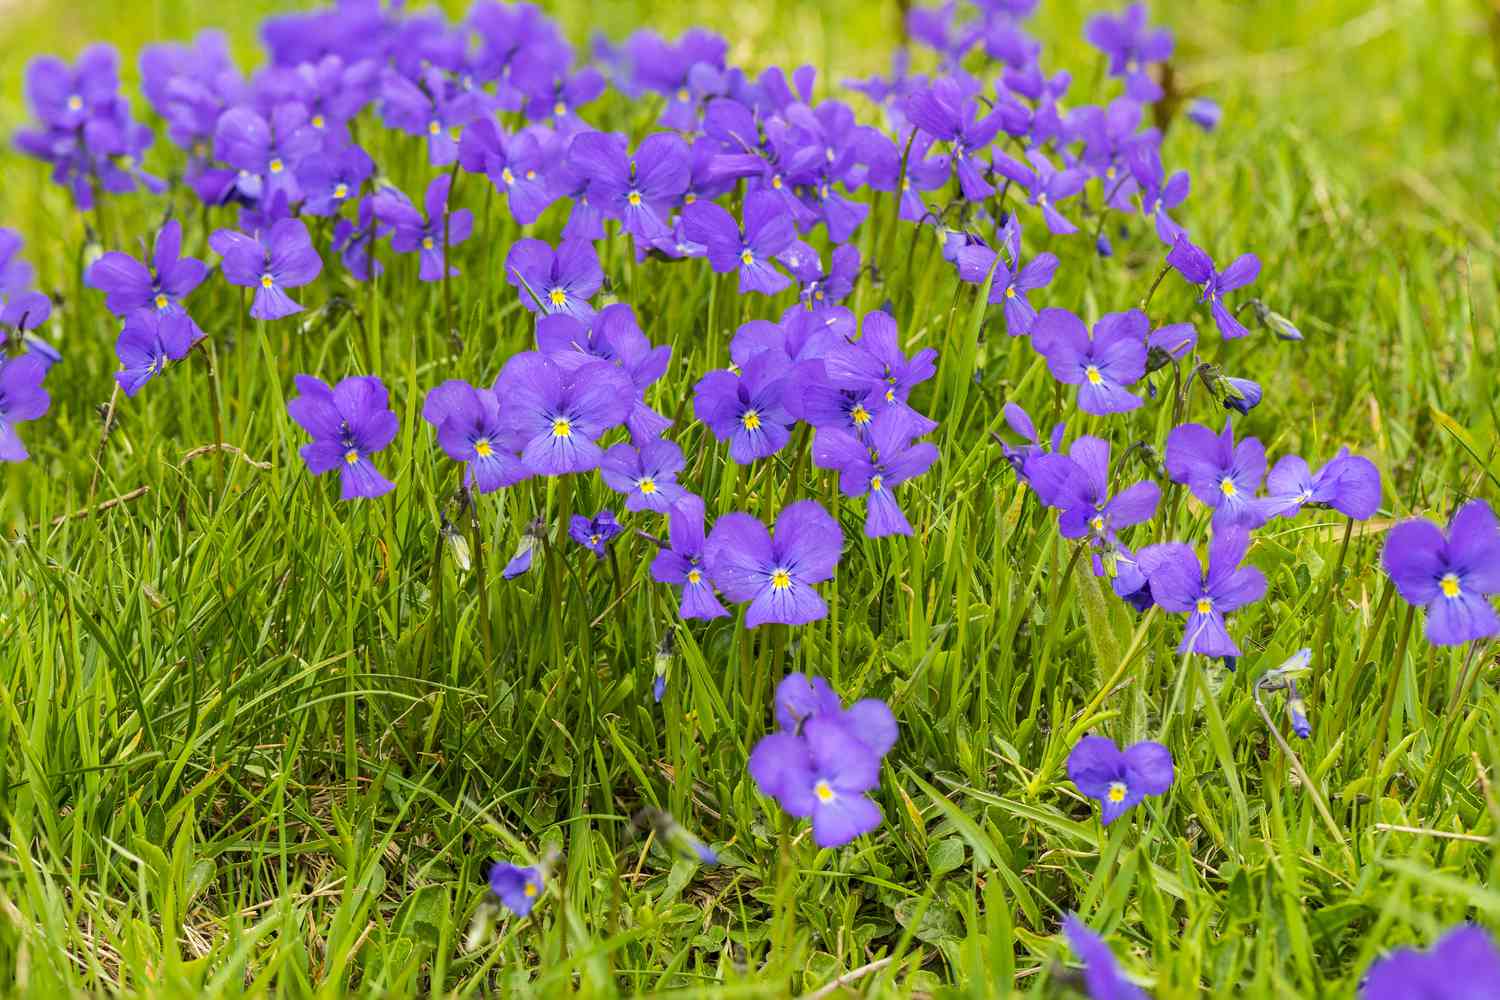 What Are Purple Flowers In Grass